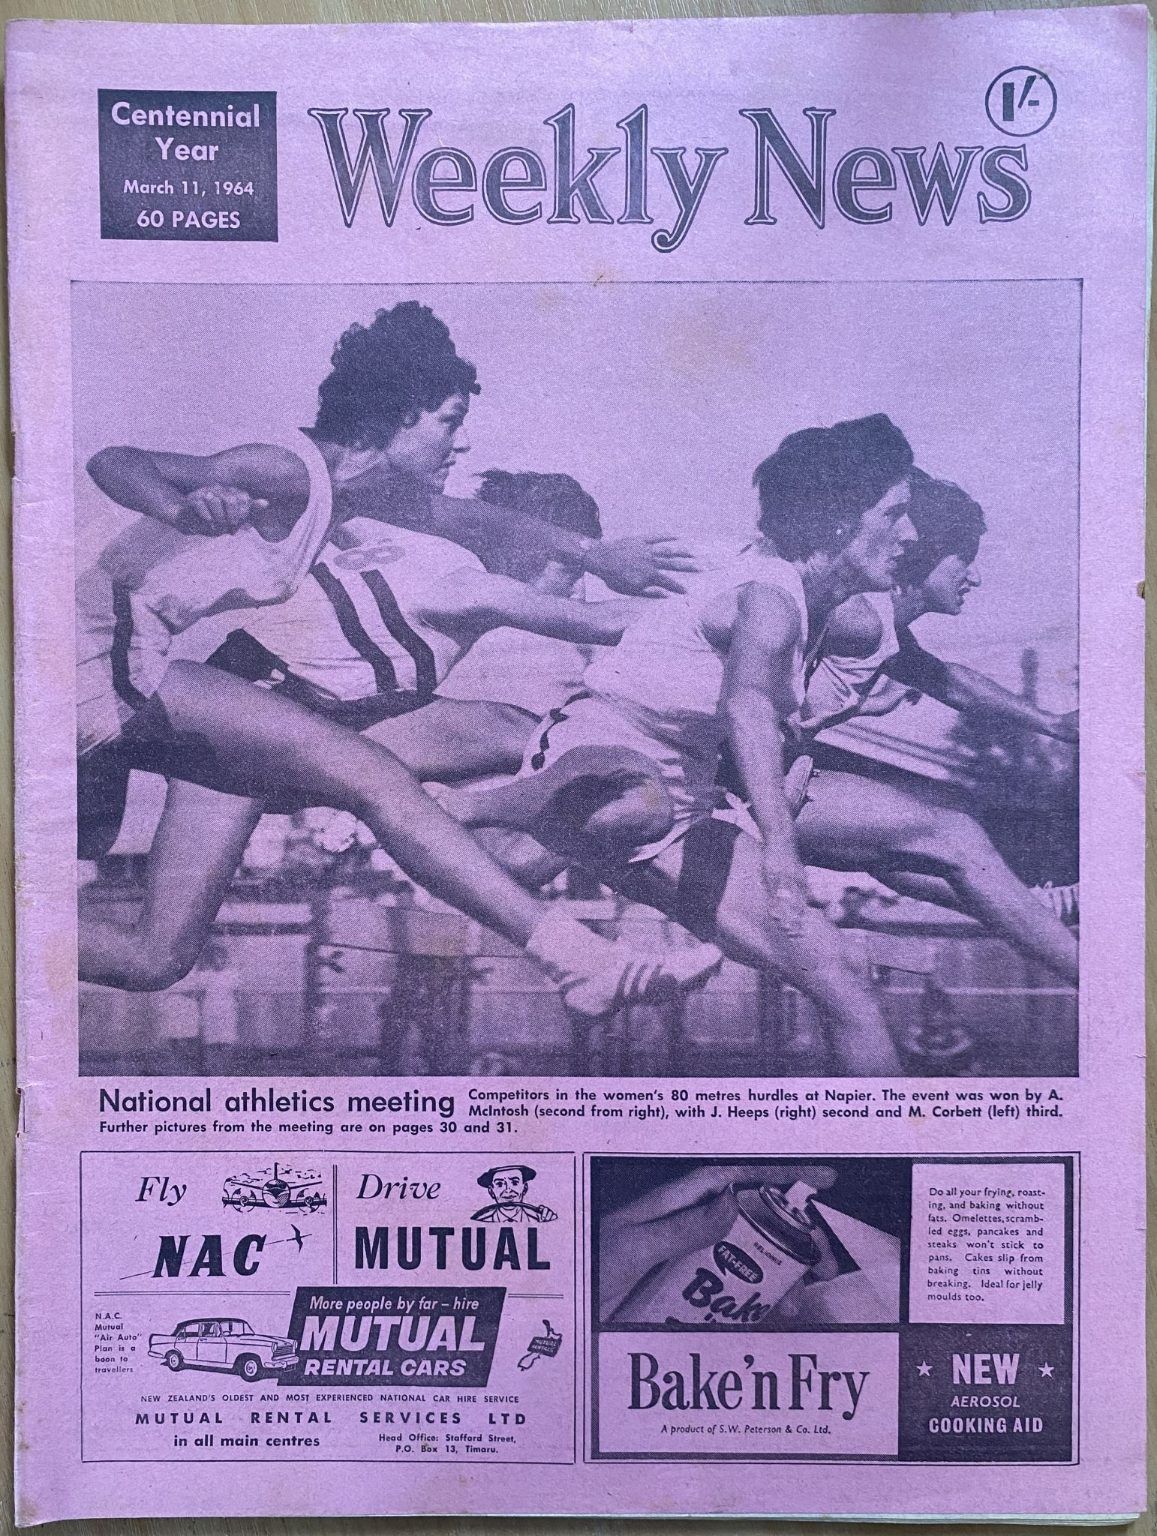 OLD NEWSPAPER: Weekly News, No. 5233, 11 March 1964